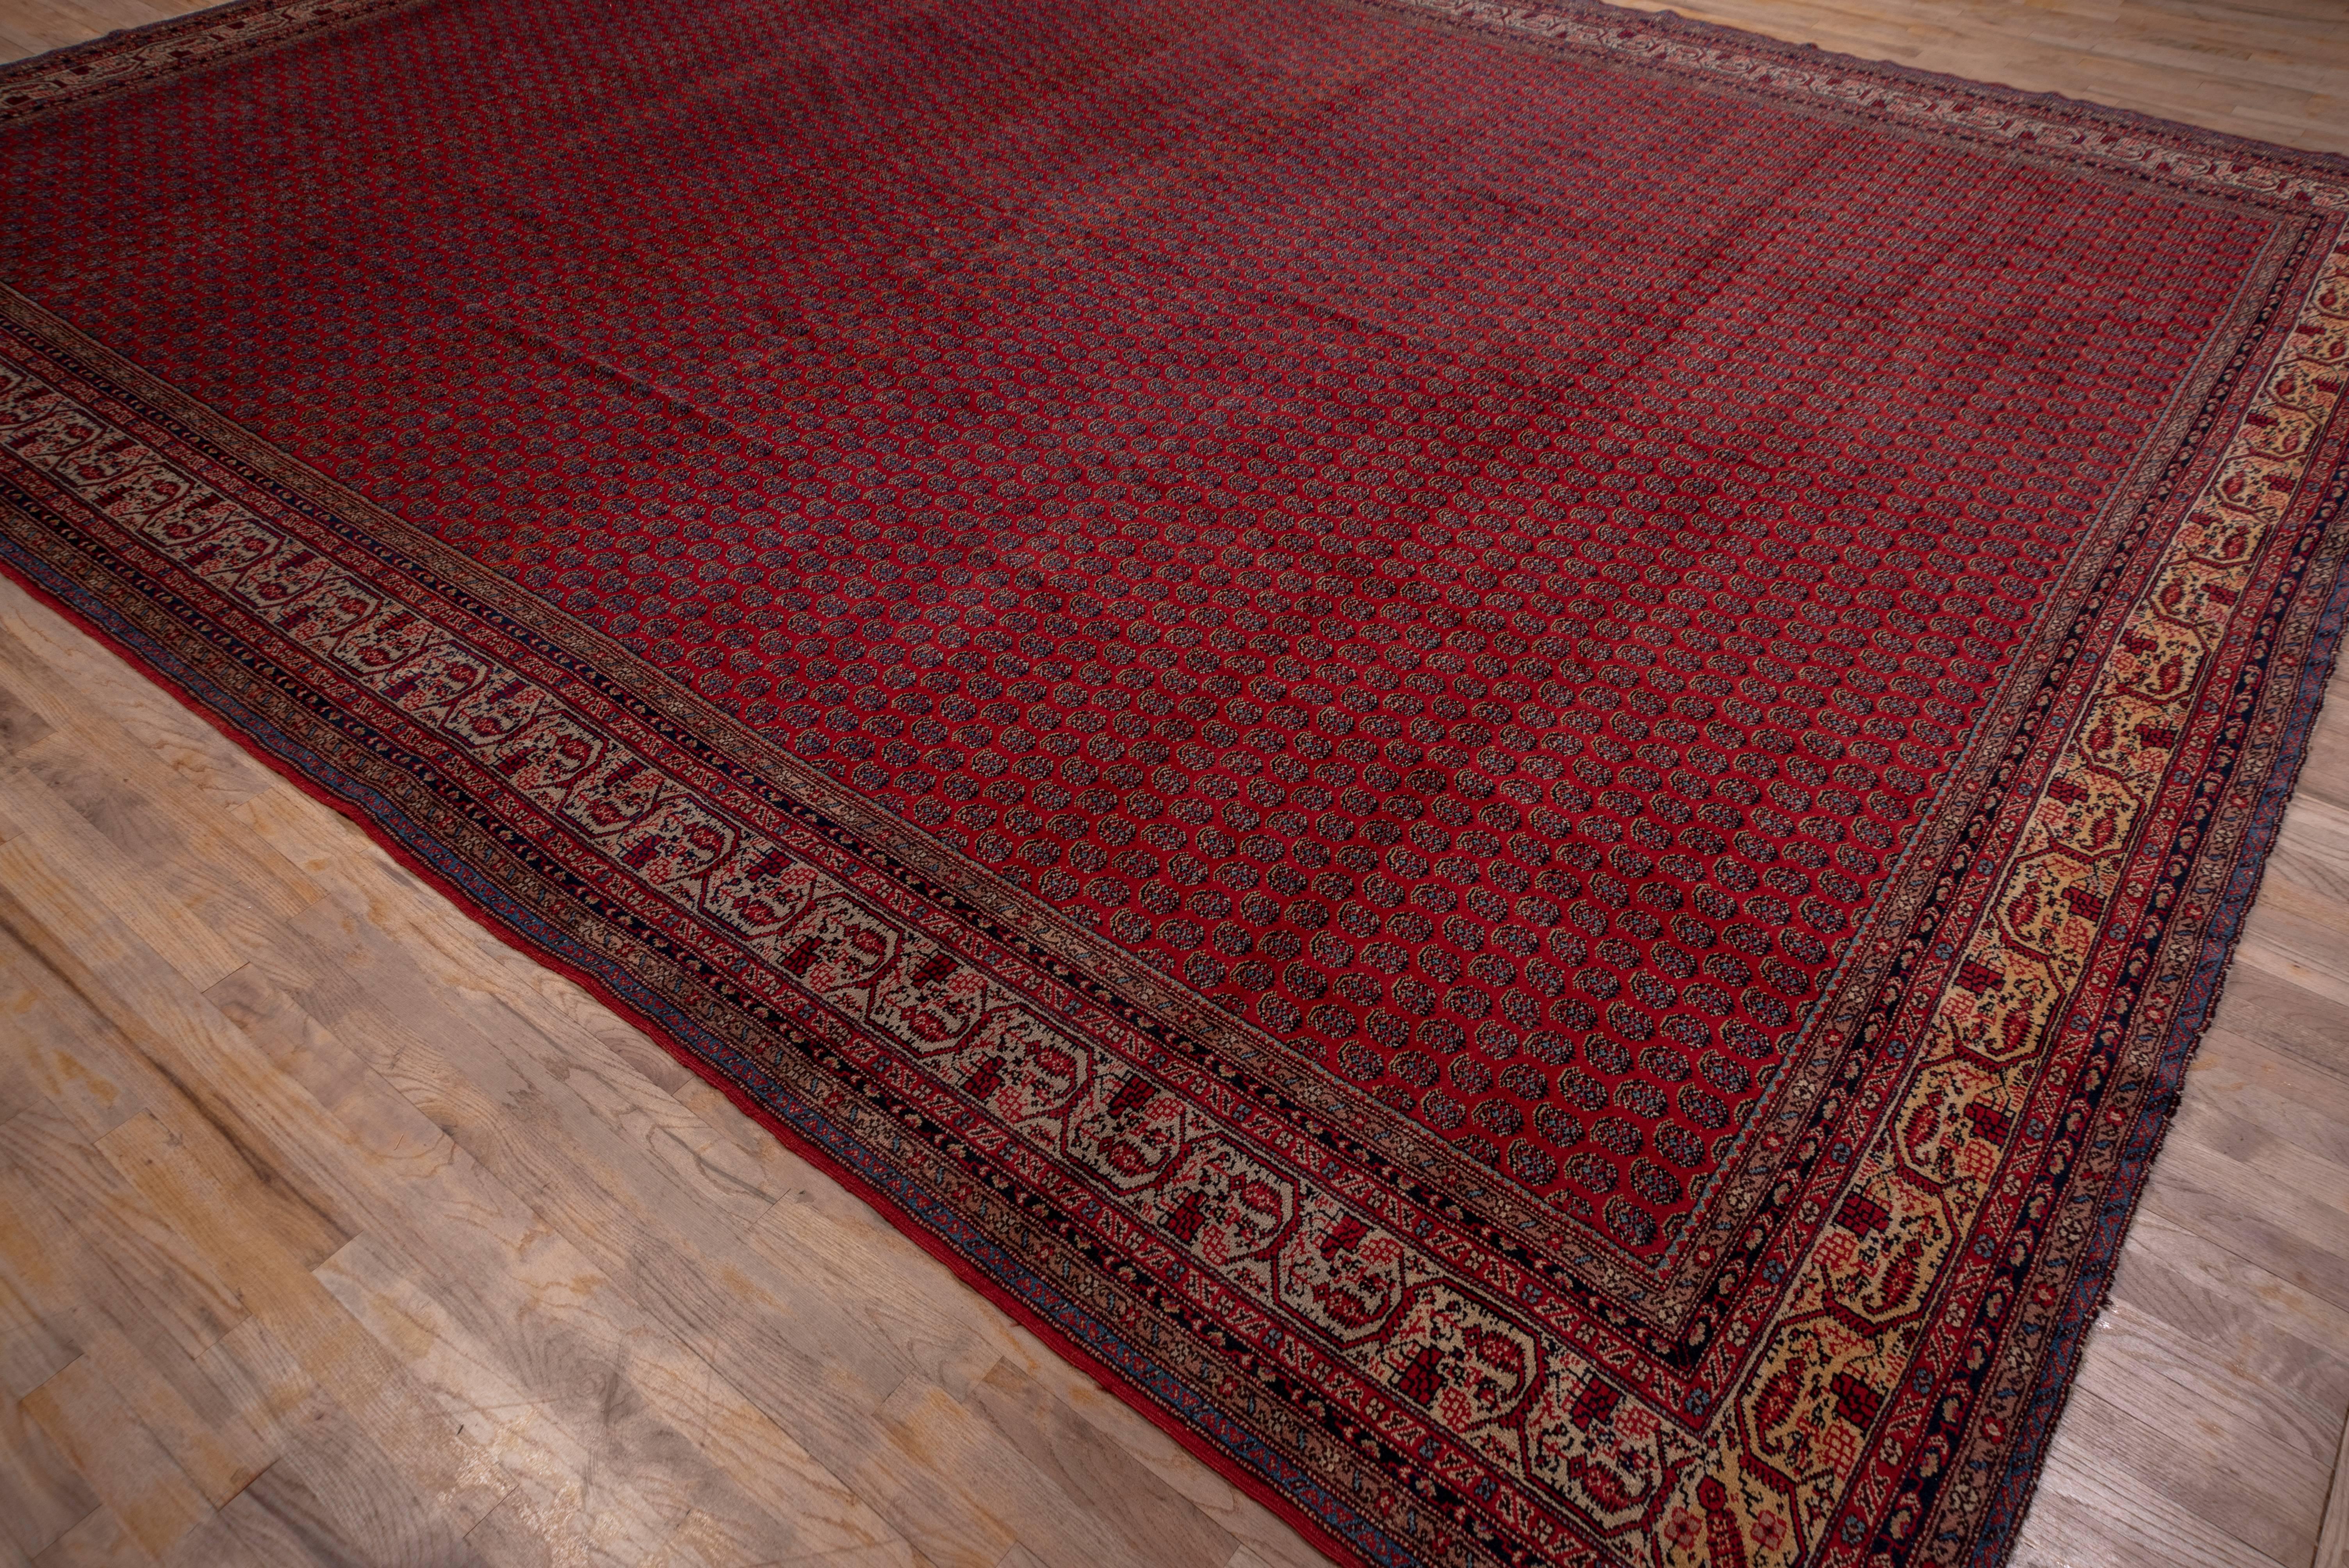 Antique Persian Saraband Carpet, Red Allover Field, Circa 1930s For Sale 3